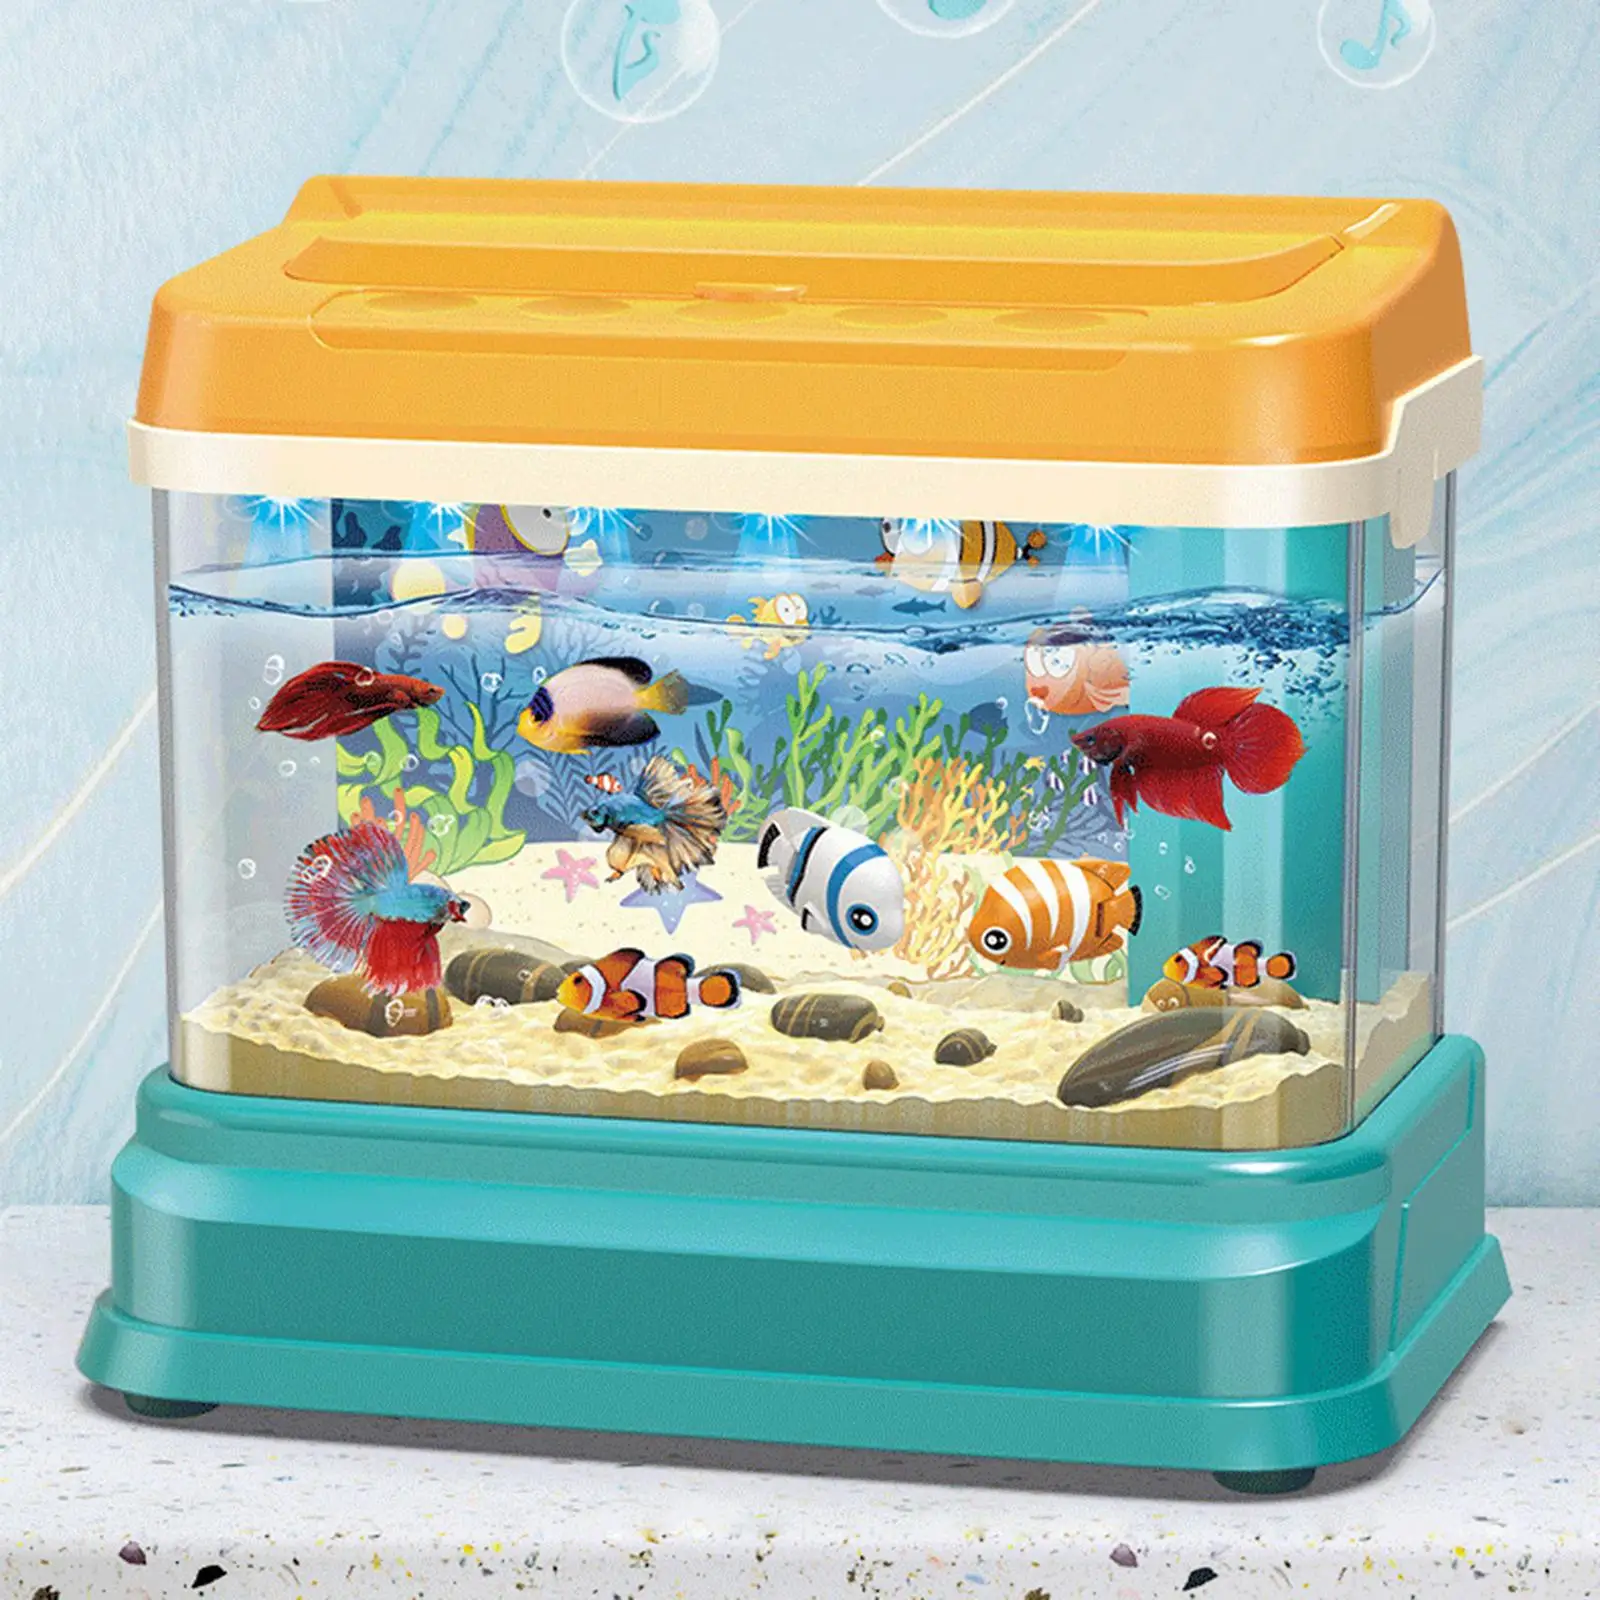 Artificial Fish Tank with Moving Fish with USB light Motor Skill Training Small Aquarium for Toddlers